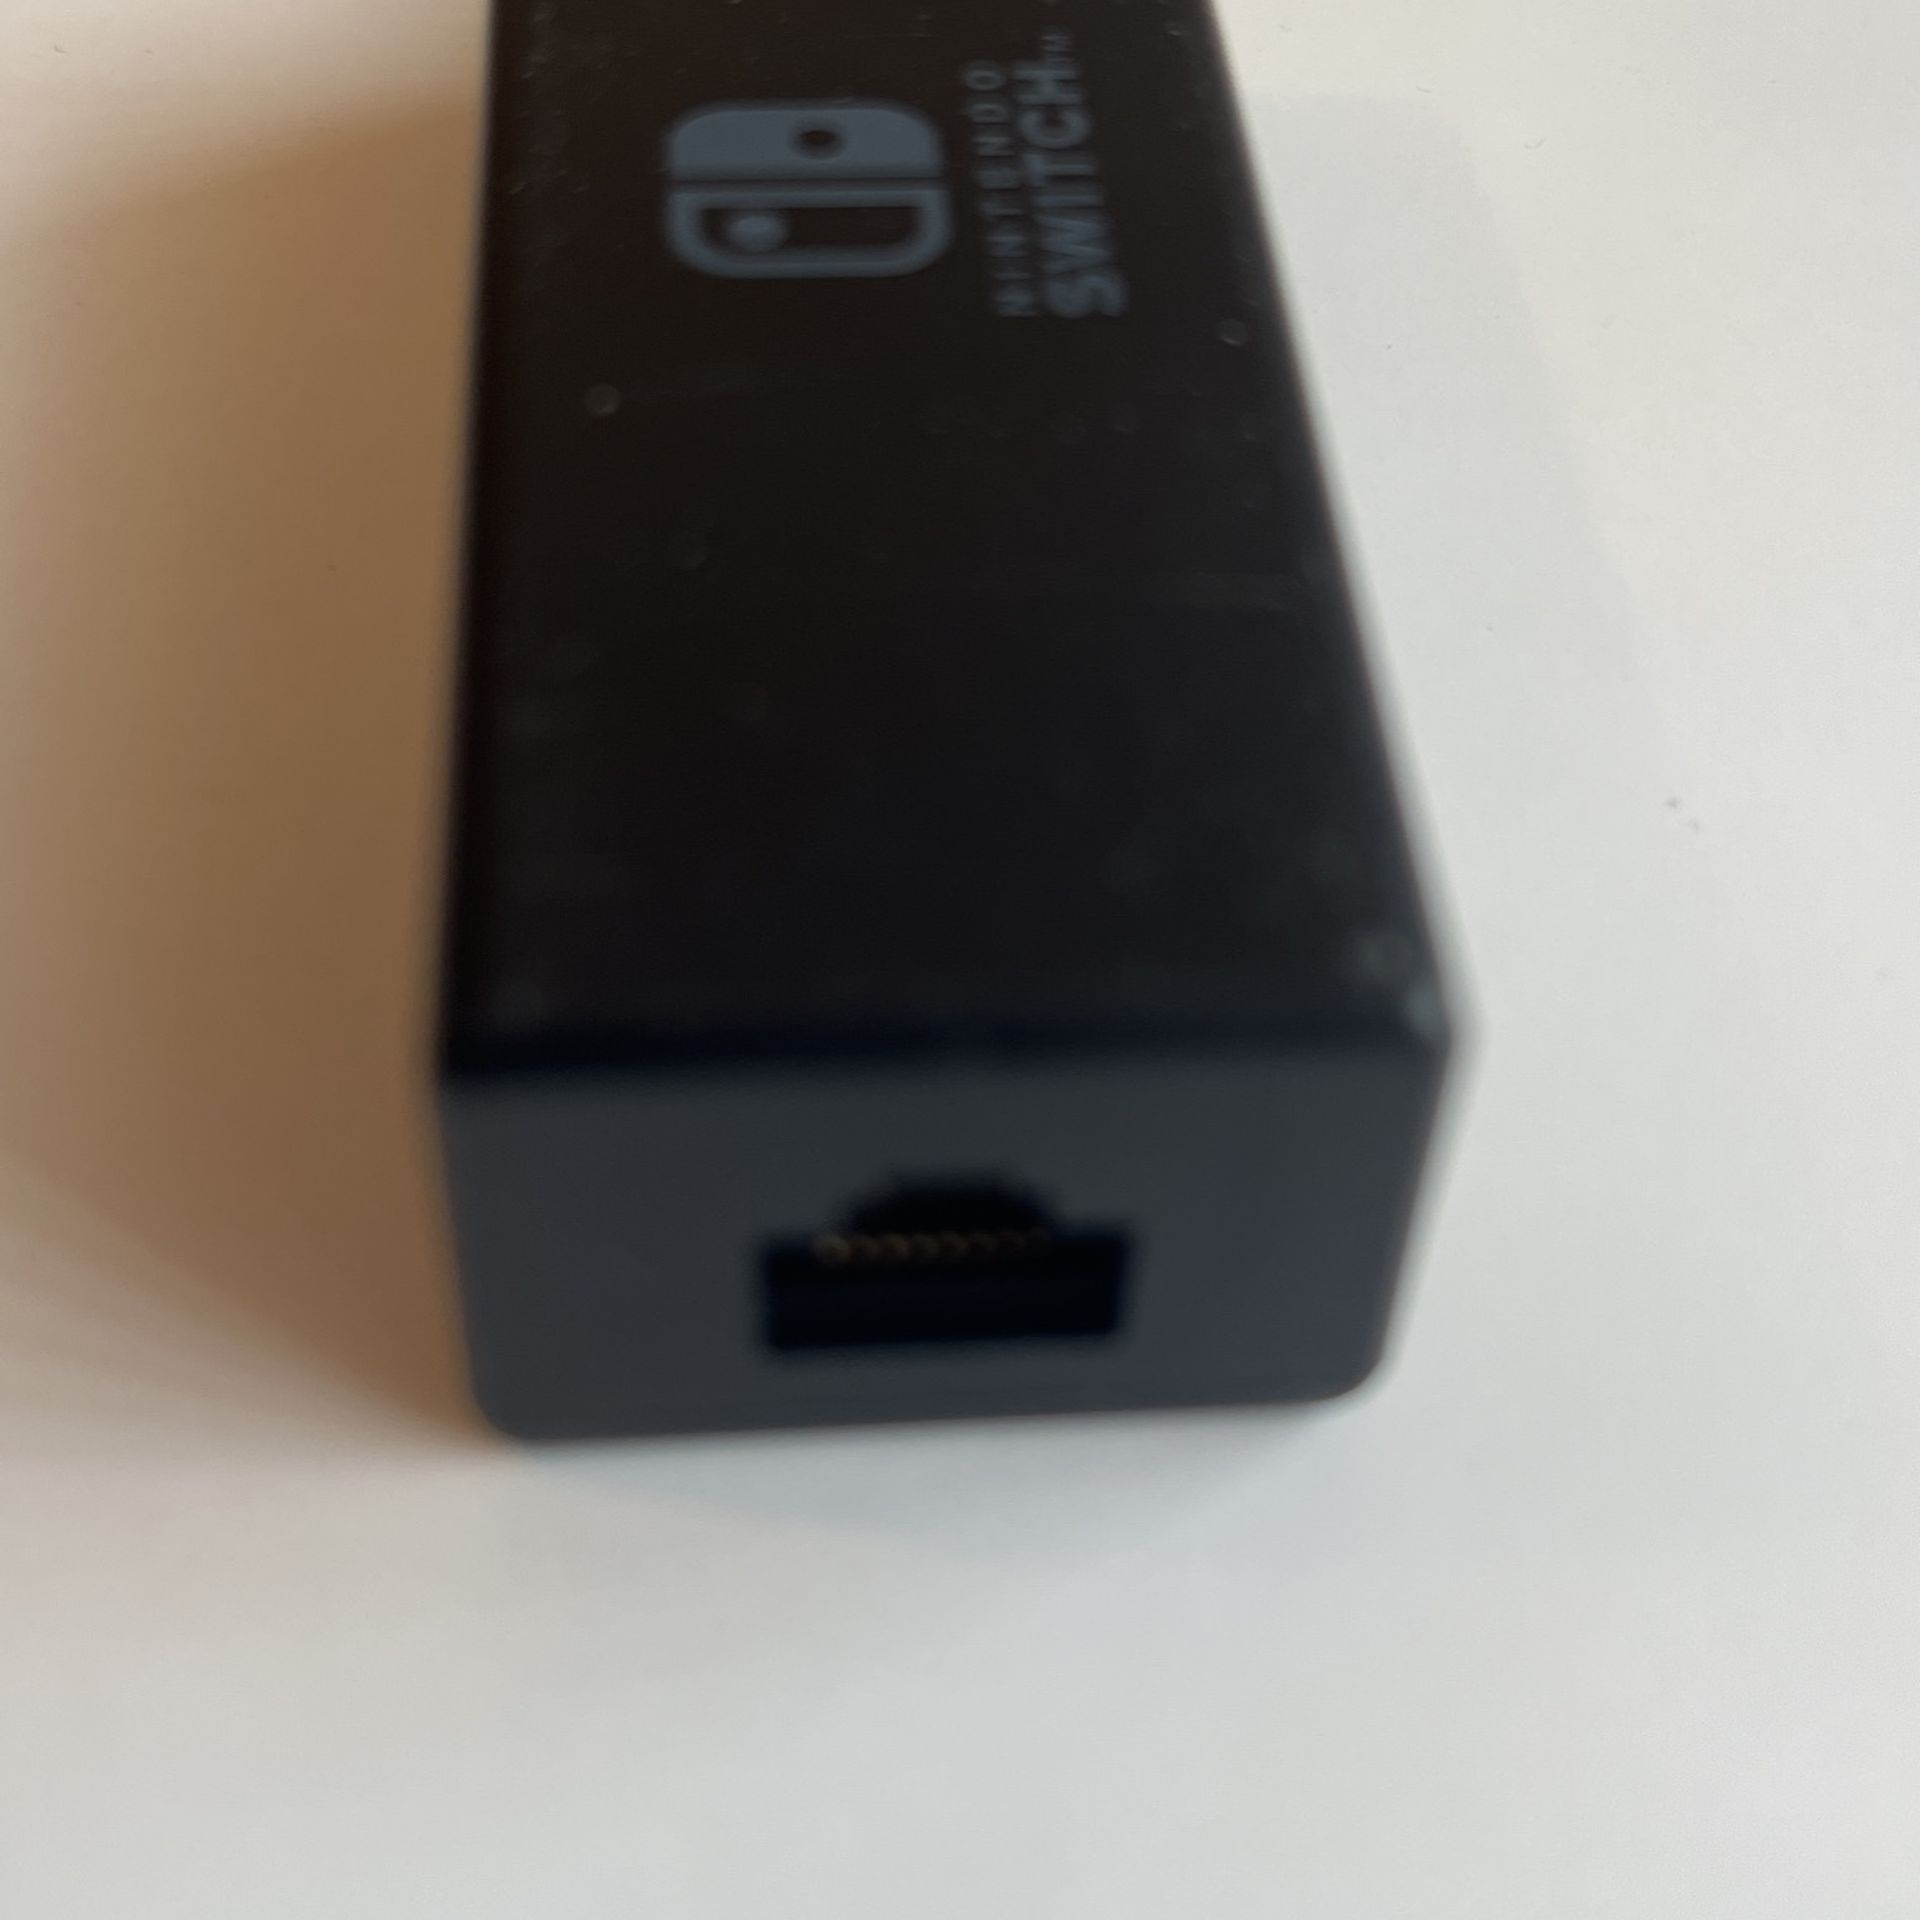 Nintendo switch Wired Internet LAN Adapter for Sale in Pasadena, CA -  OfferUp